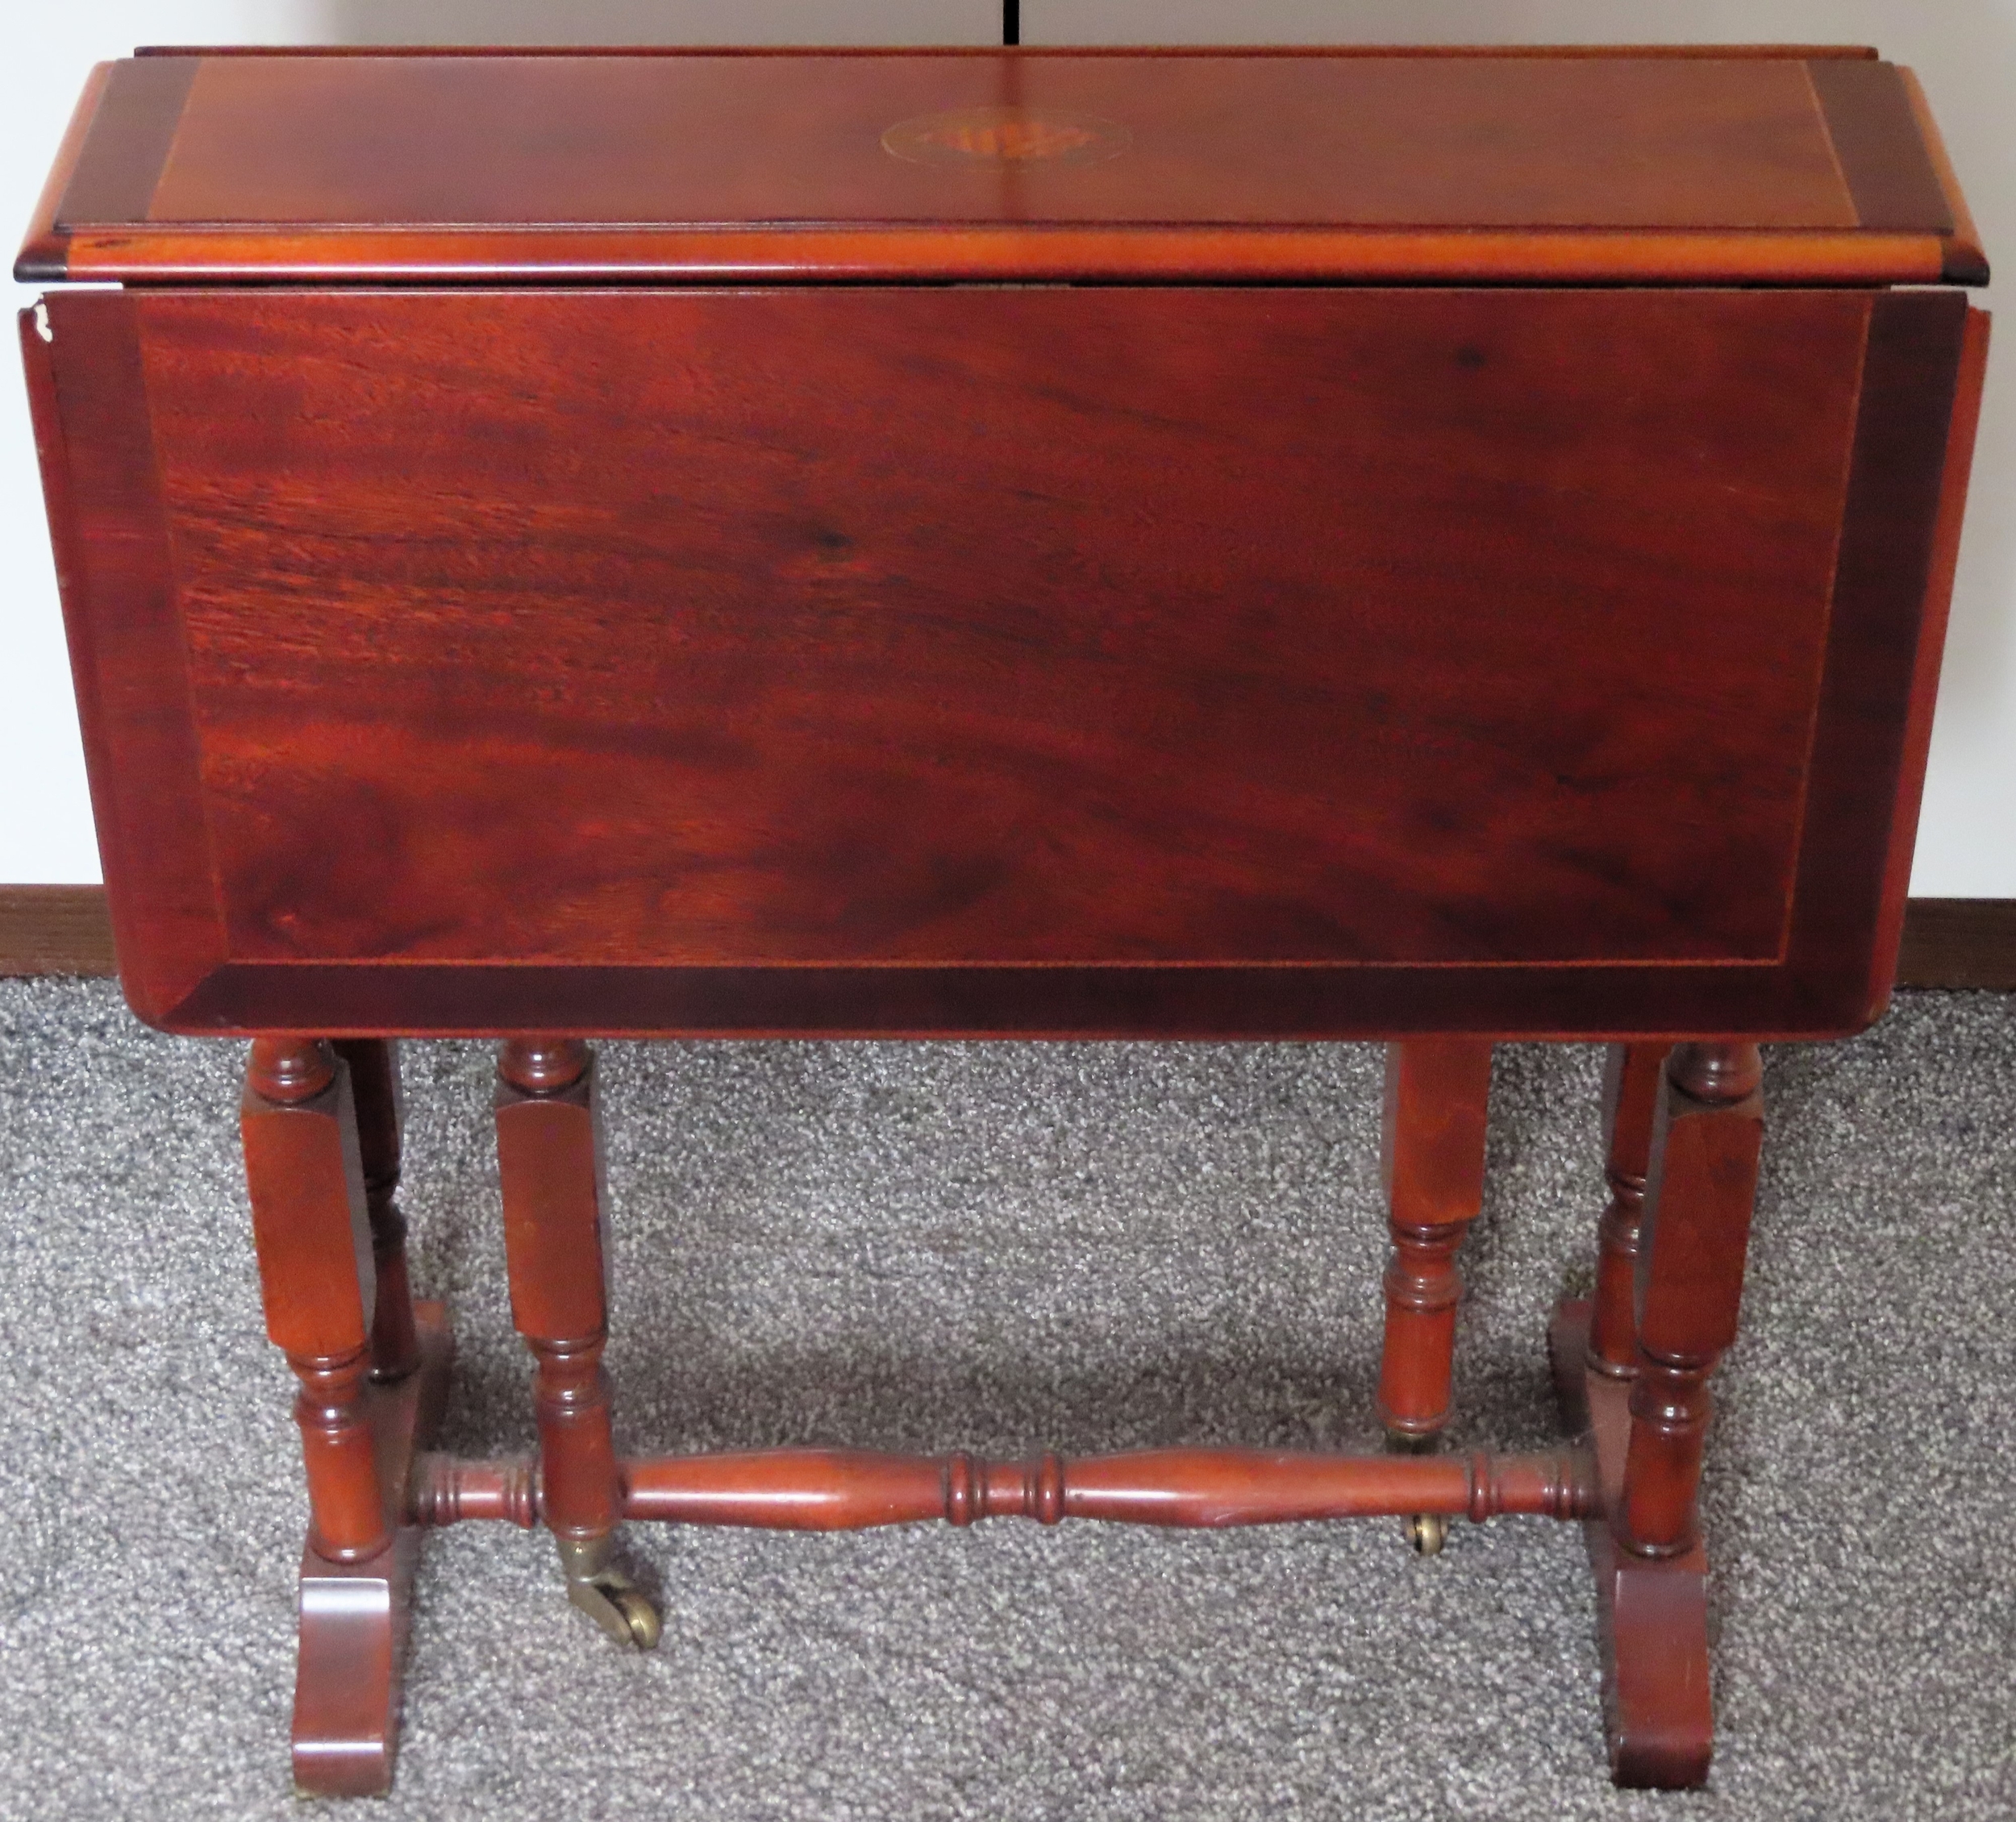 20th century shell + string inlaid small sutherland table. Approx. 57cm H x 64cm W x 55cm D